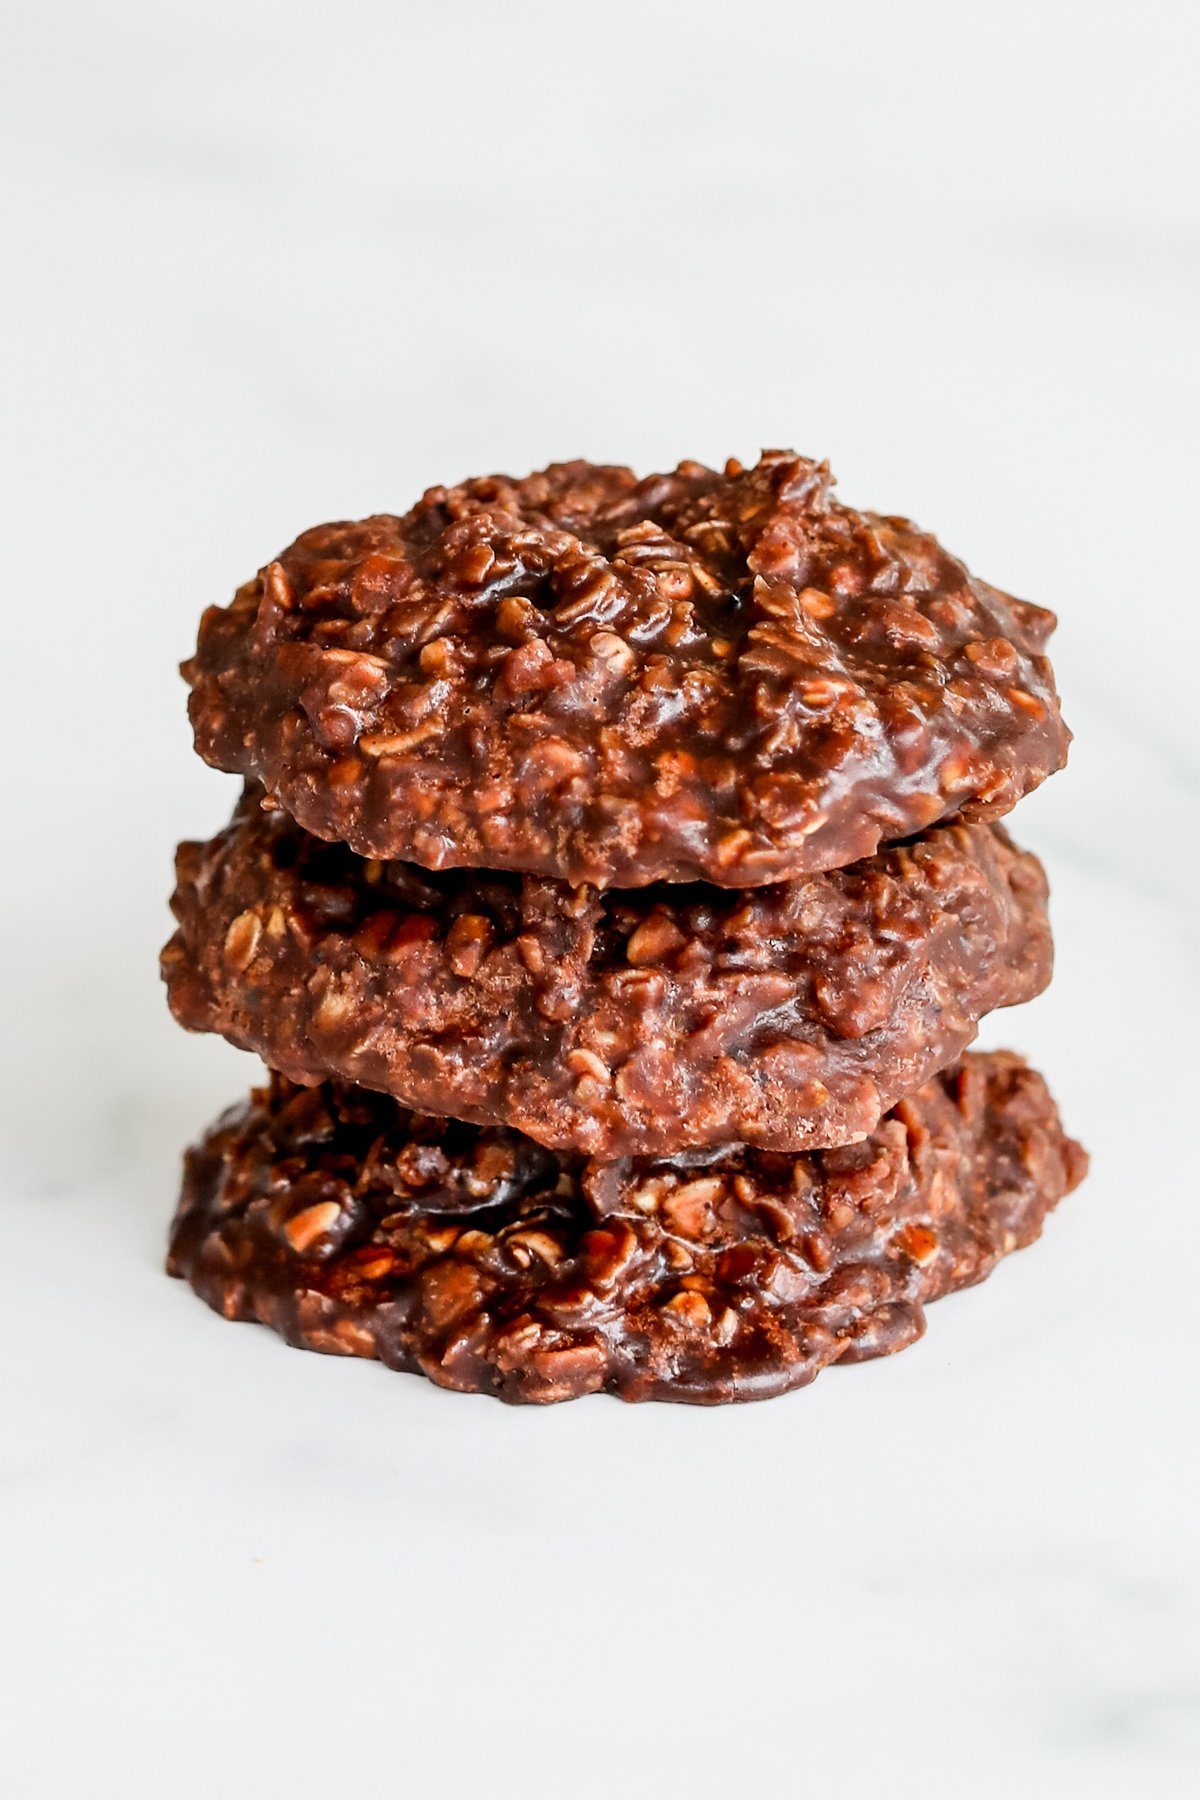 A stack of chocolate no bake cookies, also known as preacher cookies, on a white surface.